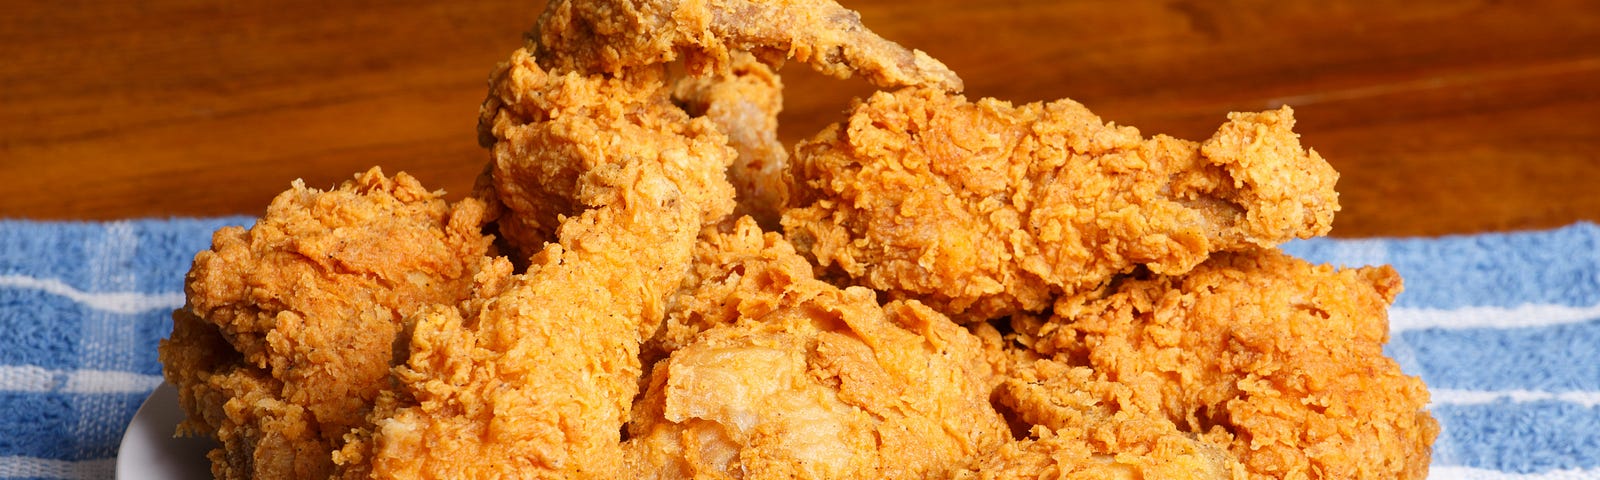 A plate of fried chicken